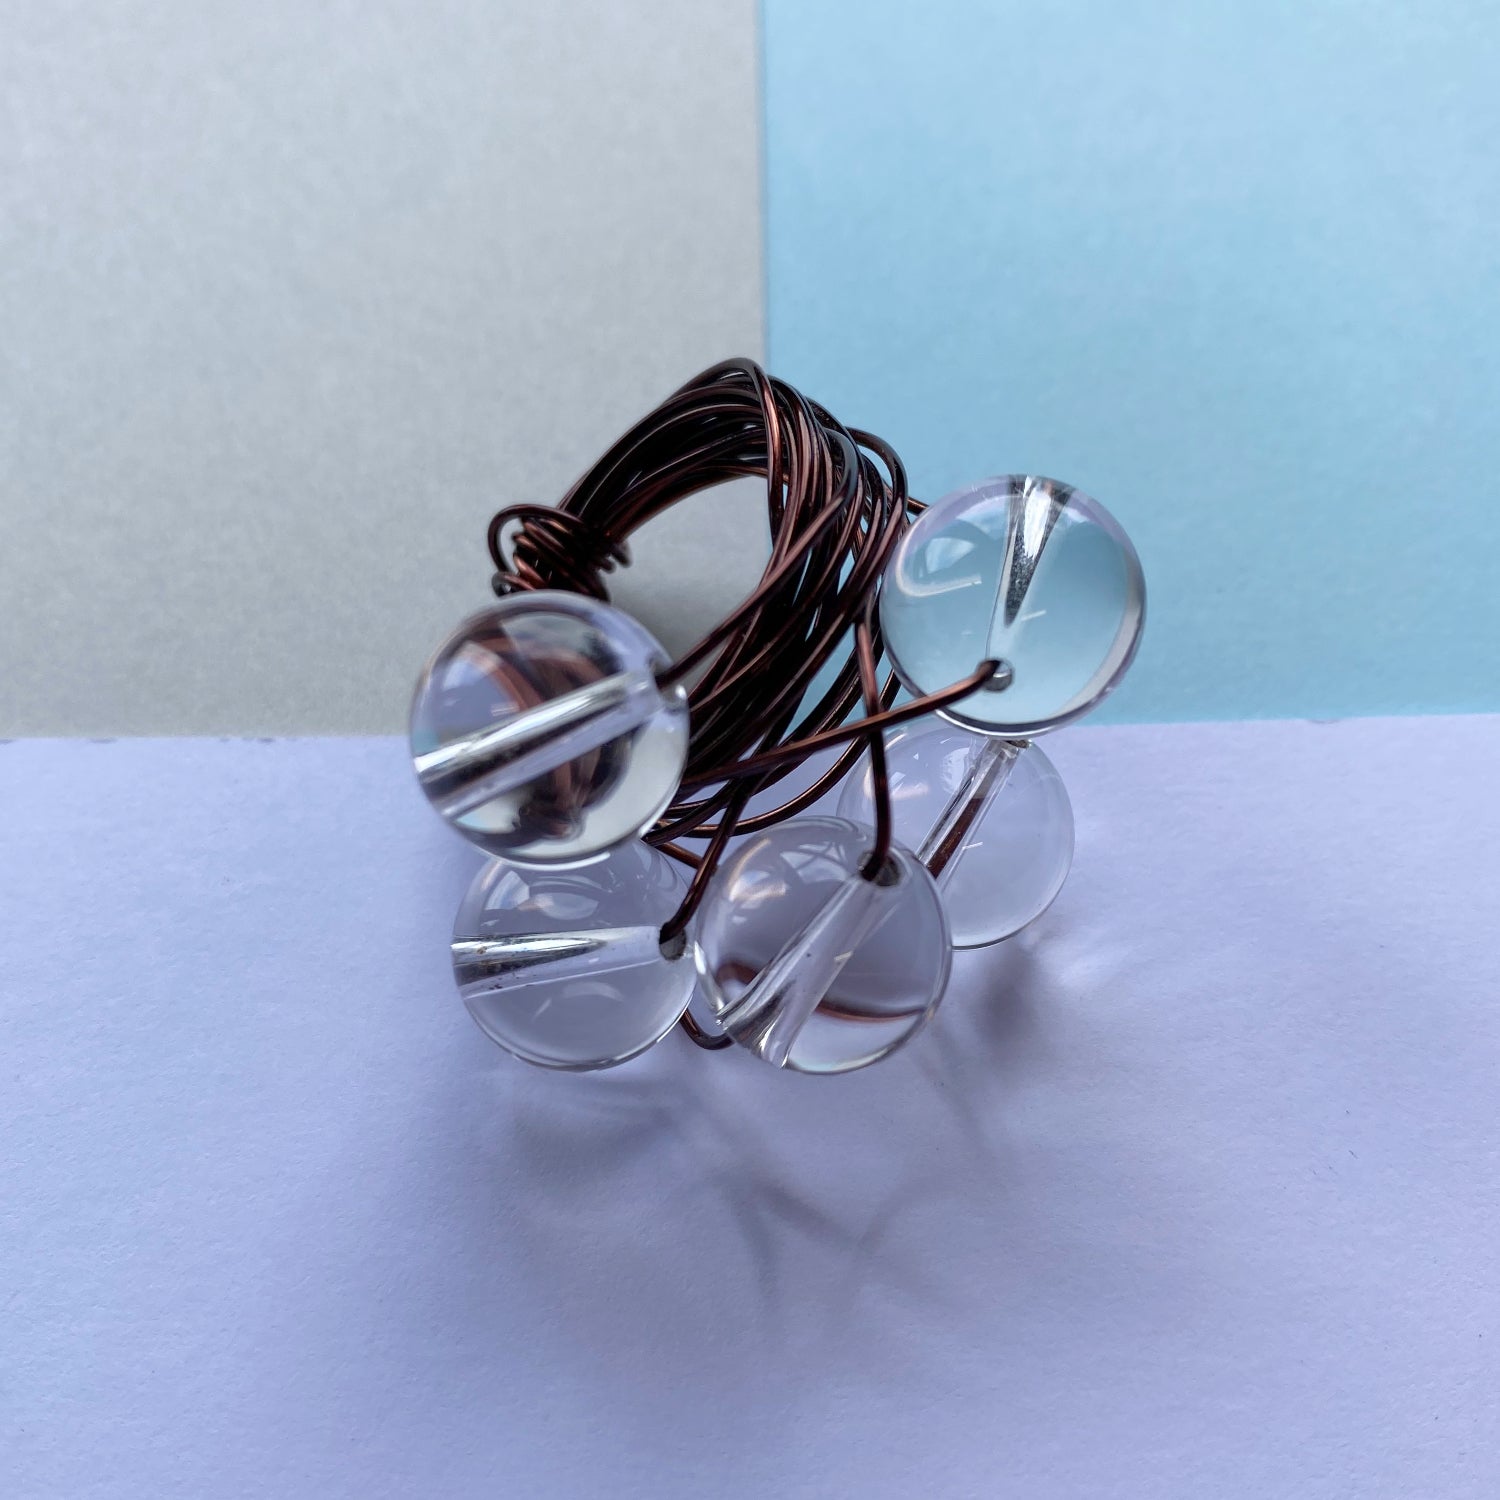 Wire Wrap Rings - silver/neutrals - large (q-w) - The Argentum Design Co